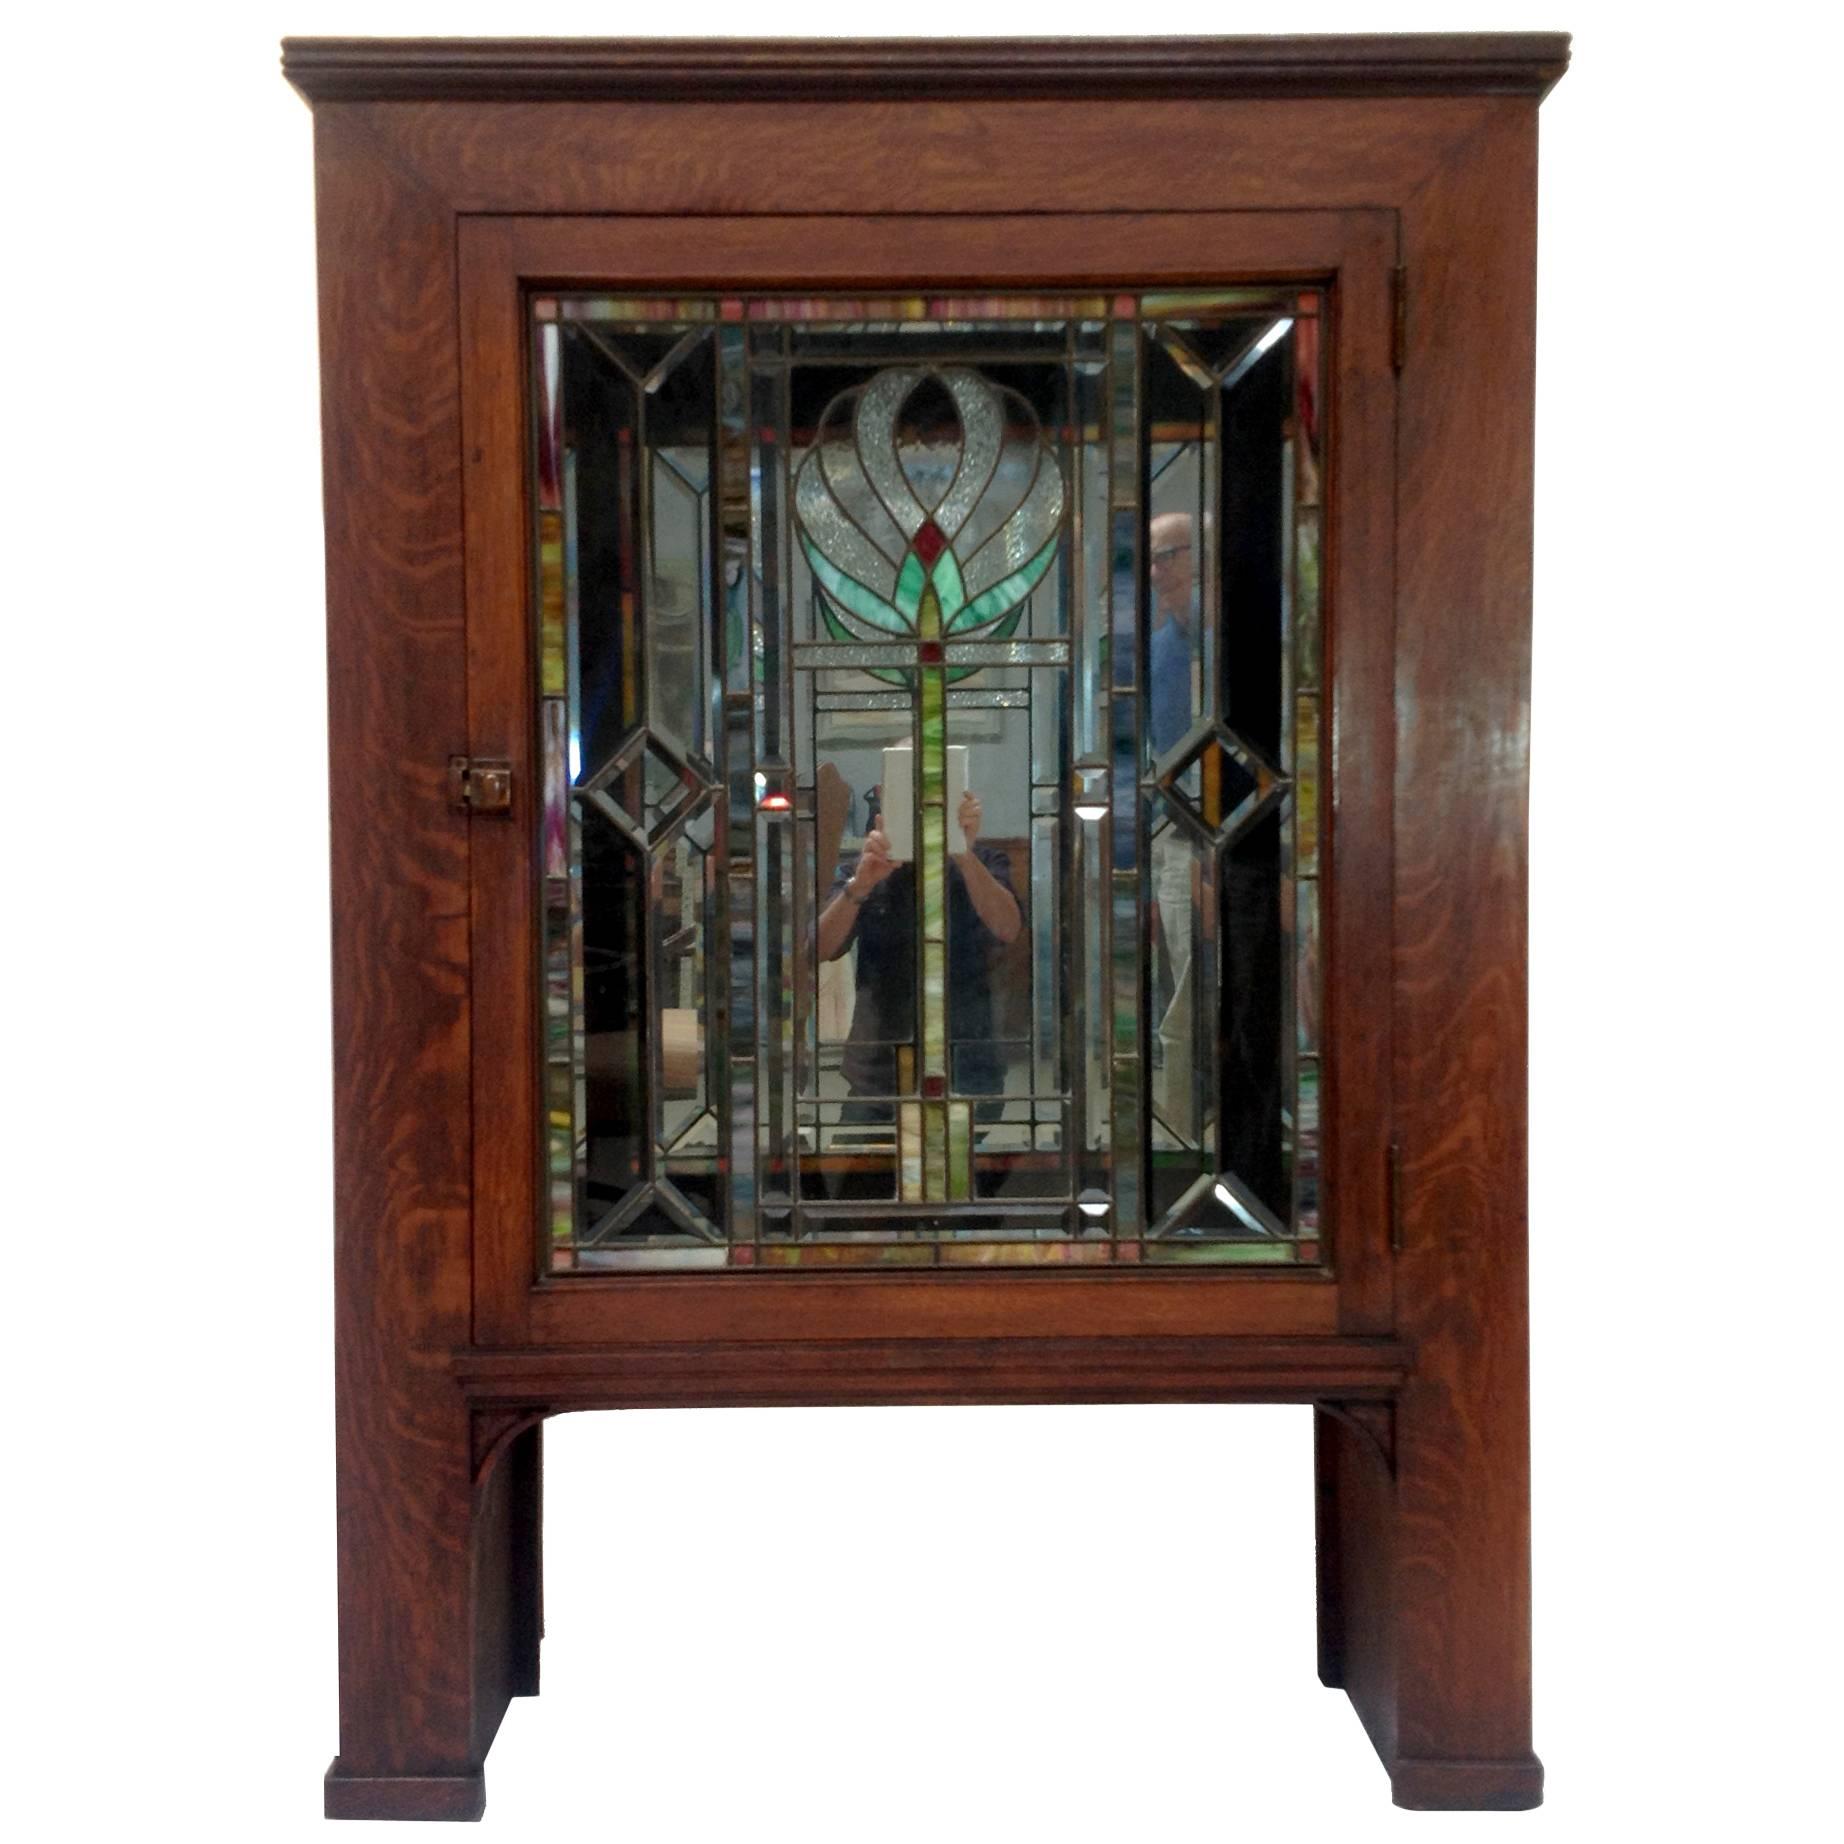 Antique Stickley Style Cabinet with Stained Glass Door